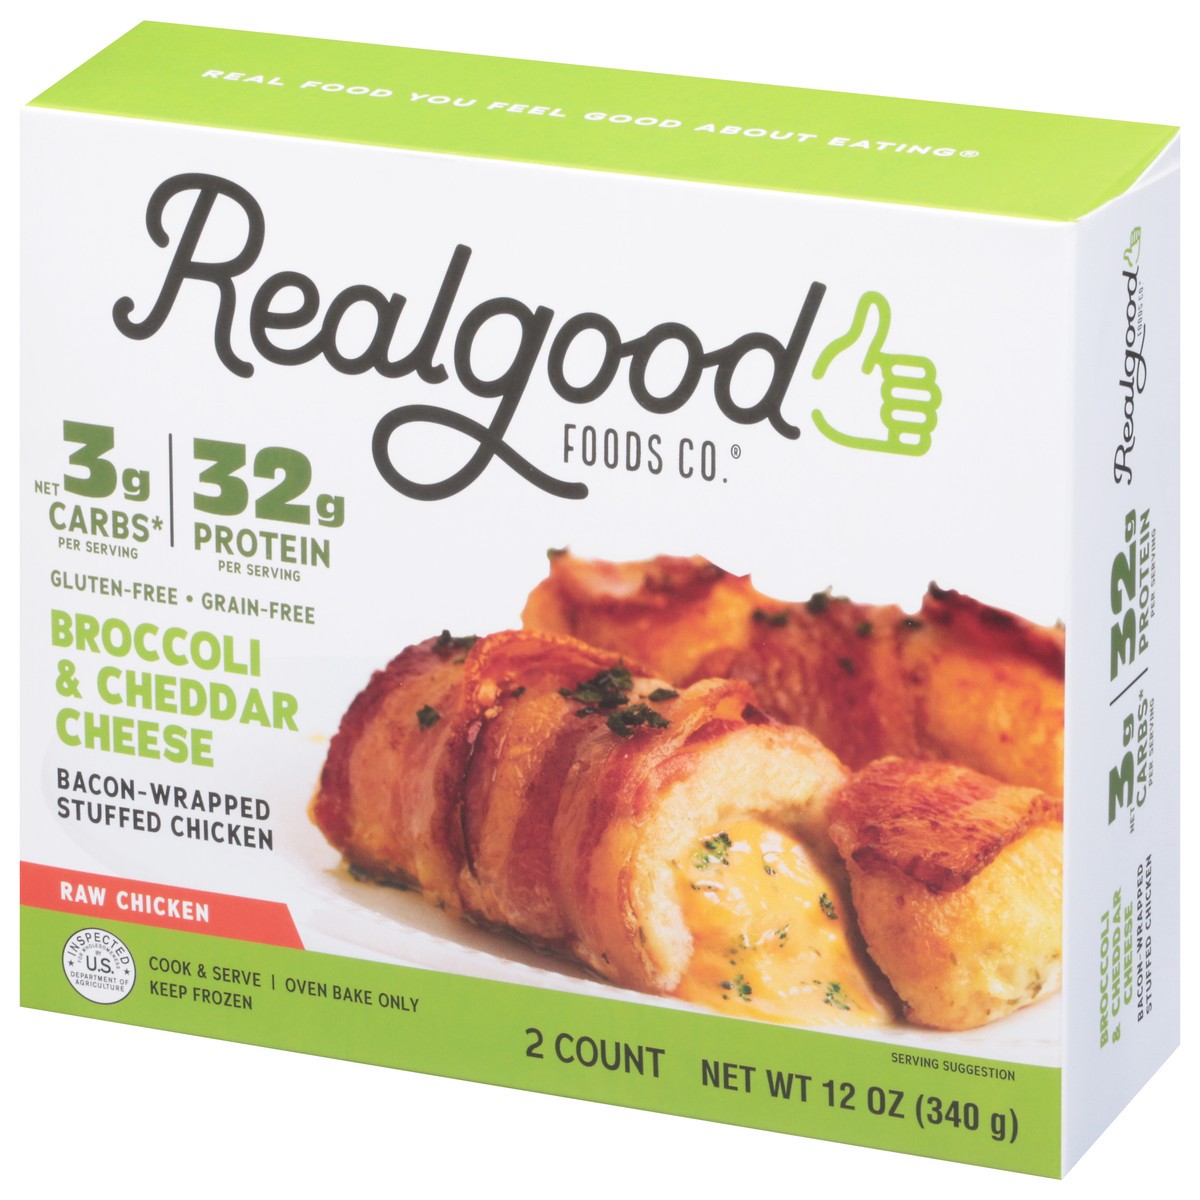 slide 3 of 11, Realgood Foods Co. Broccoli & Cheddar Cheese Bacon-Wrapped Stuffed Chicken 2 ea, 12 oz